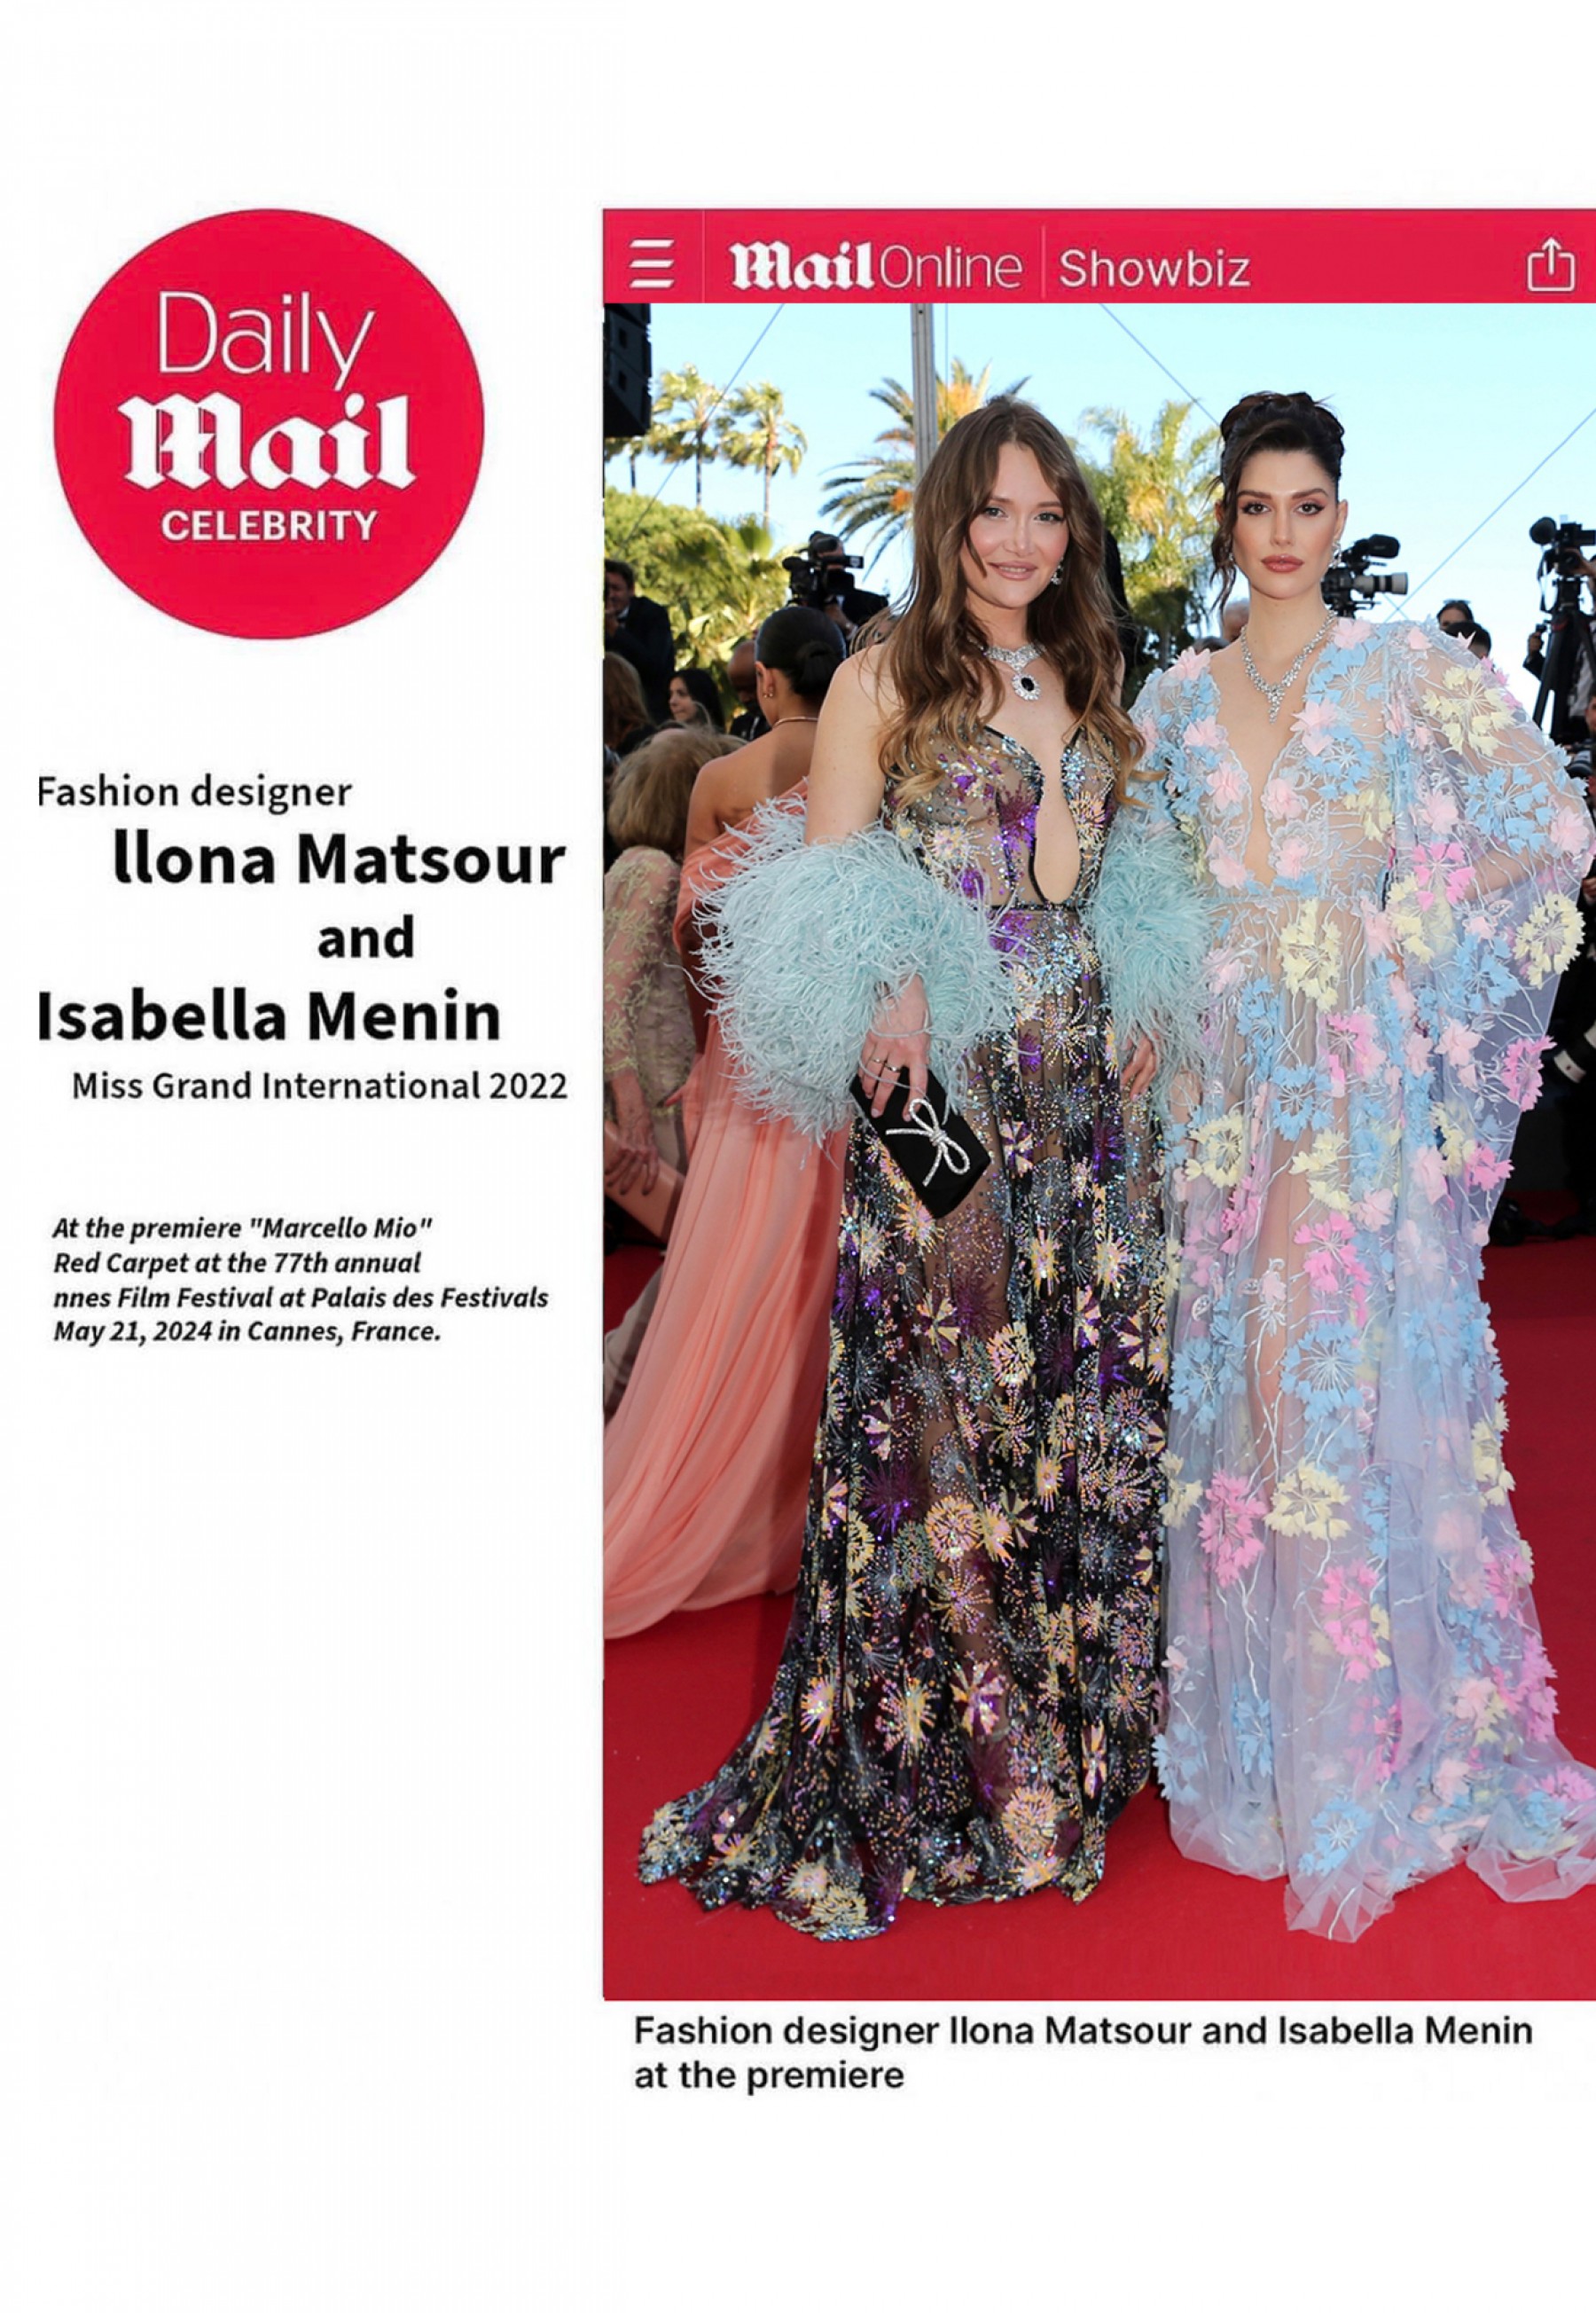 Cannes Film Festival: Ilona Matsour and Miss Grand International Isabella Menin at the Premiere 